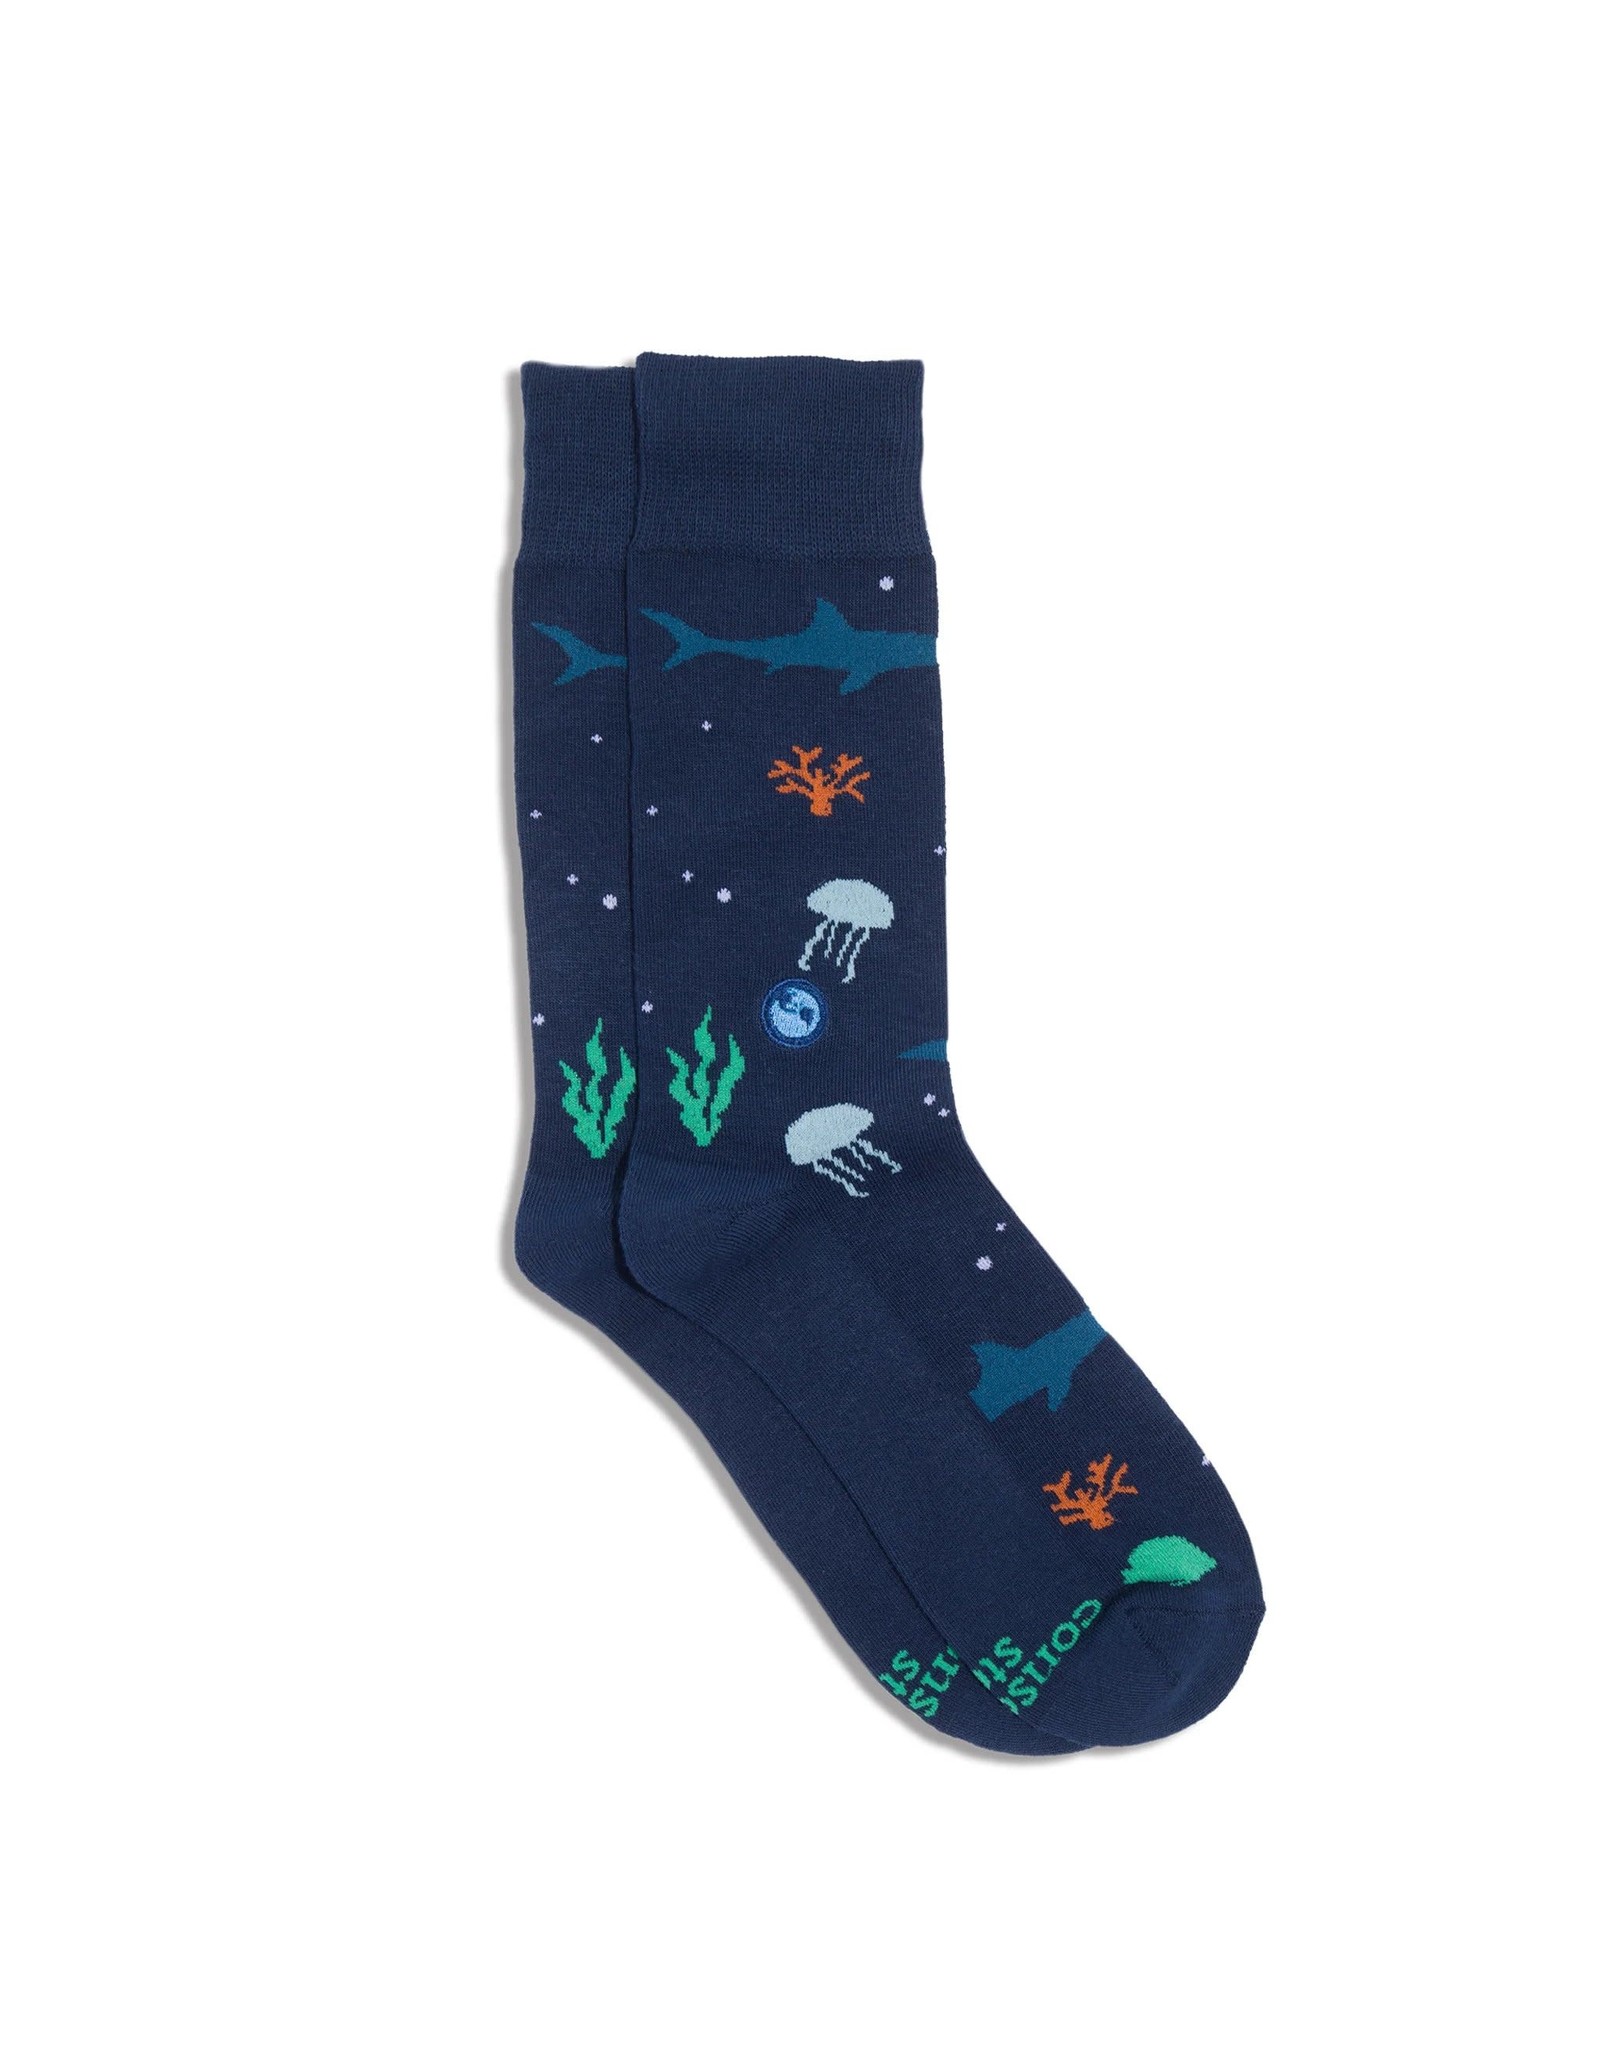 Trade roots Socks that Protect Our Planet, Oceans